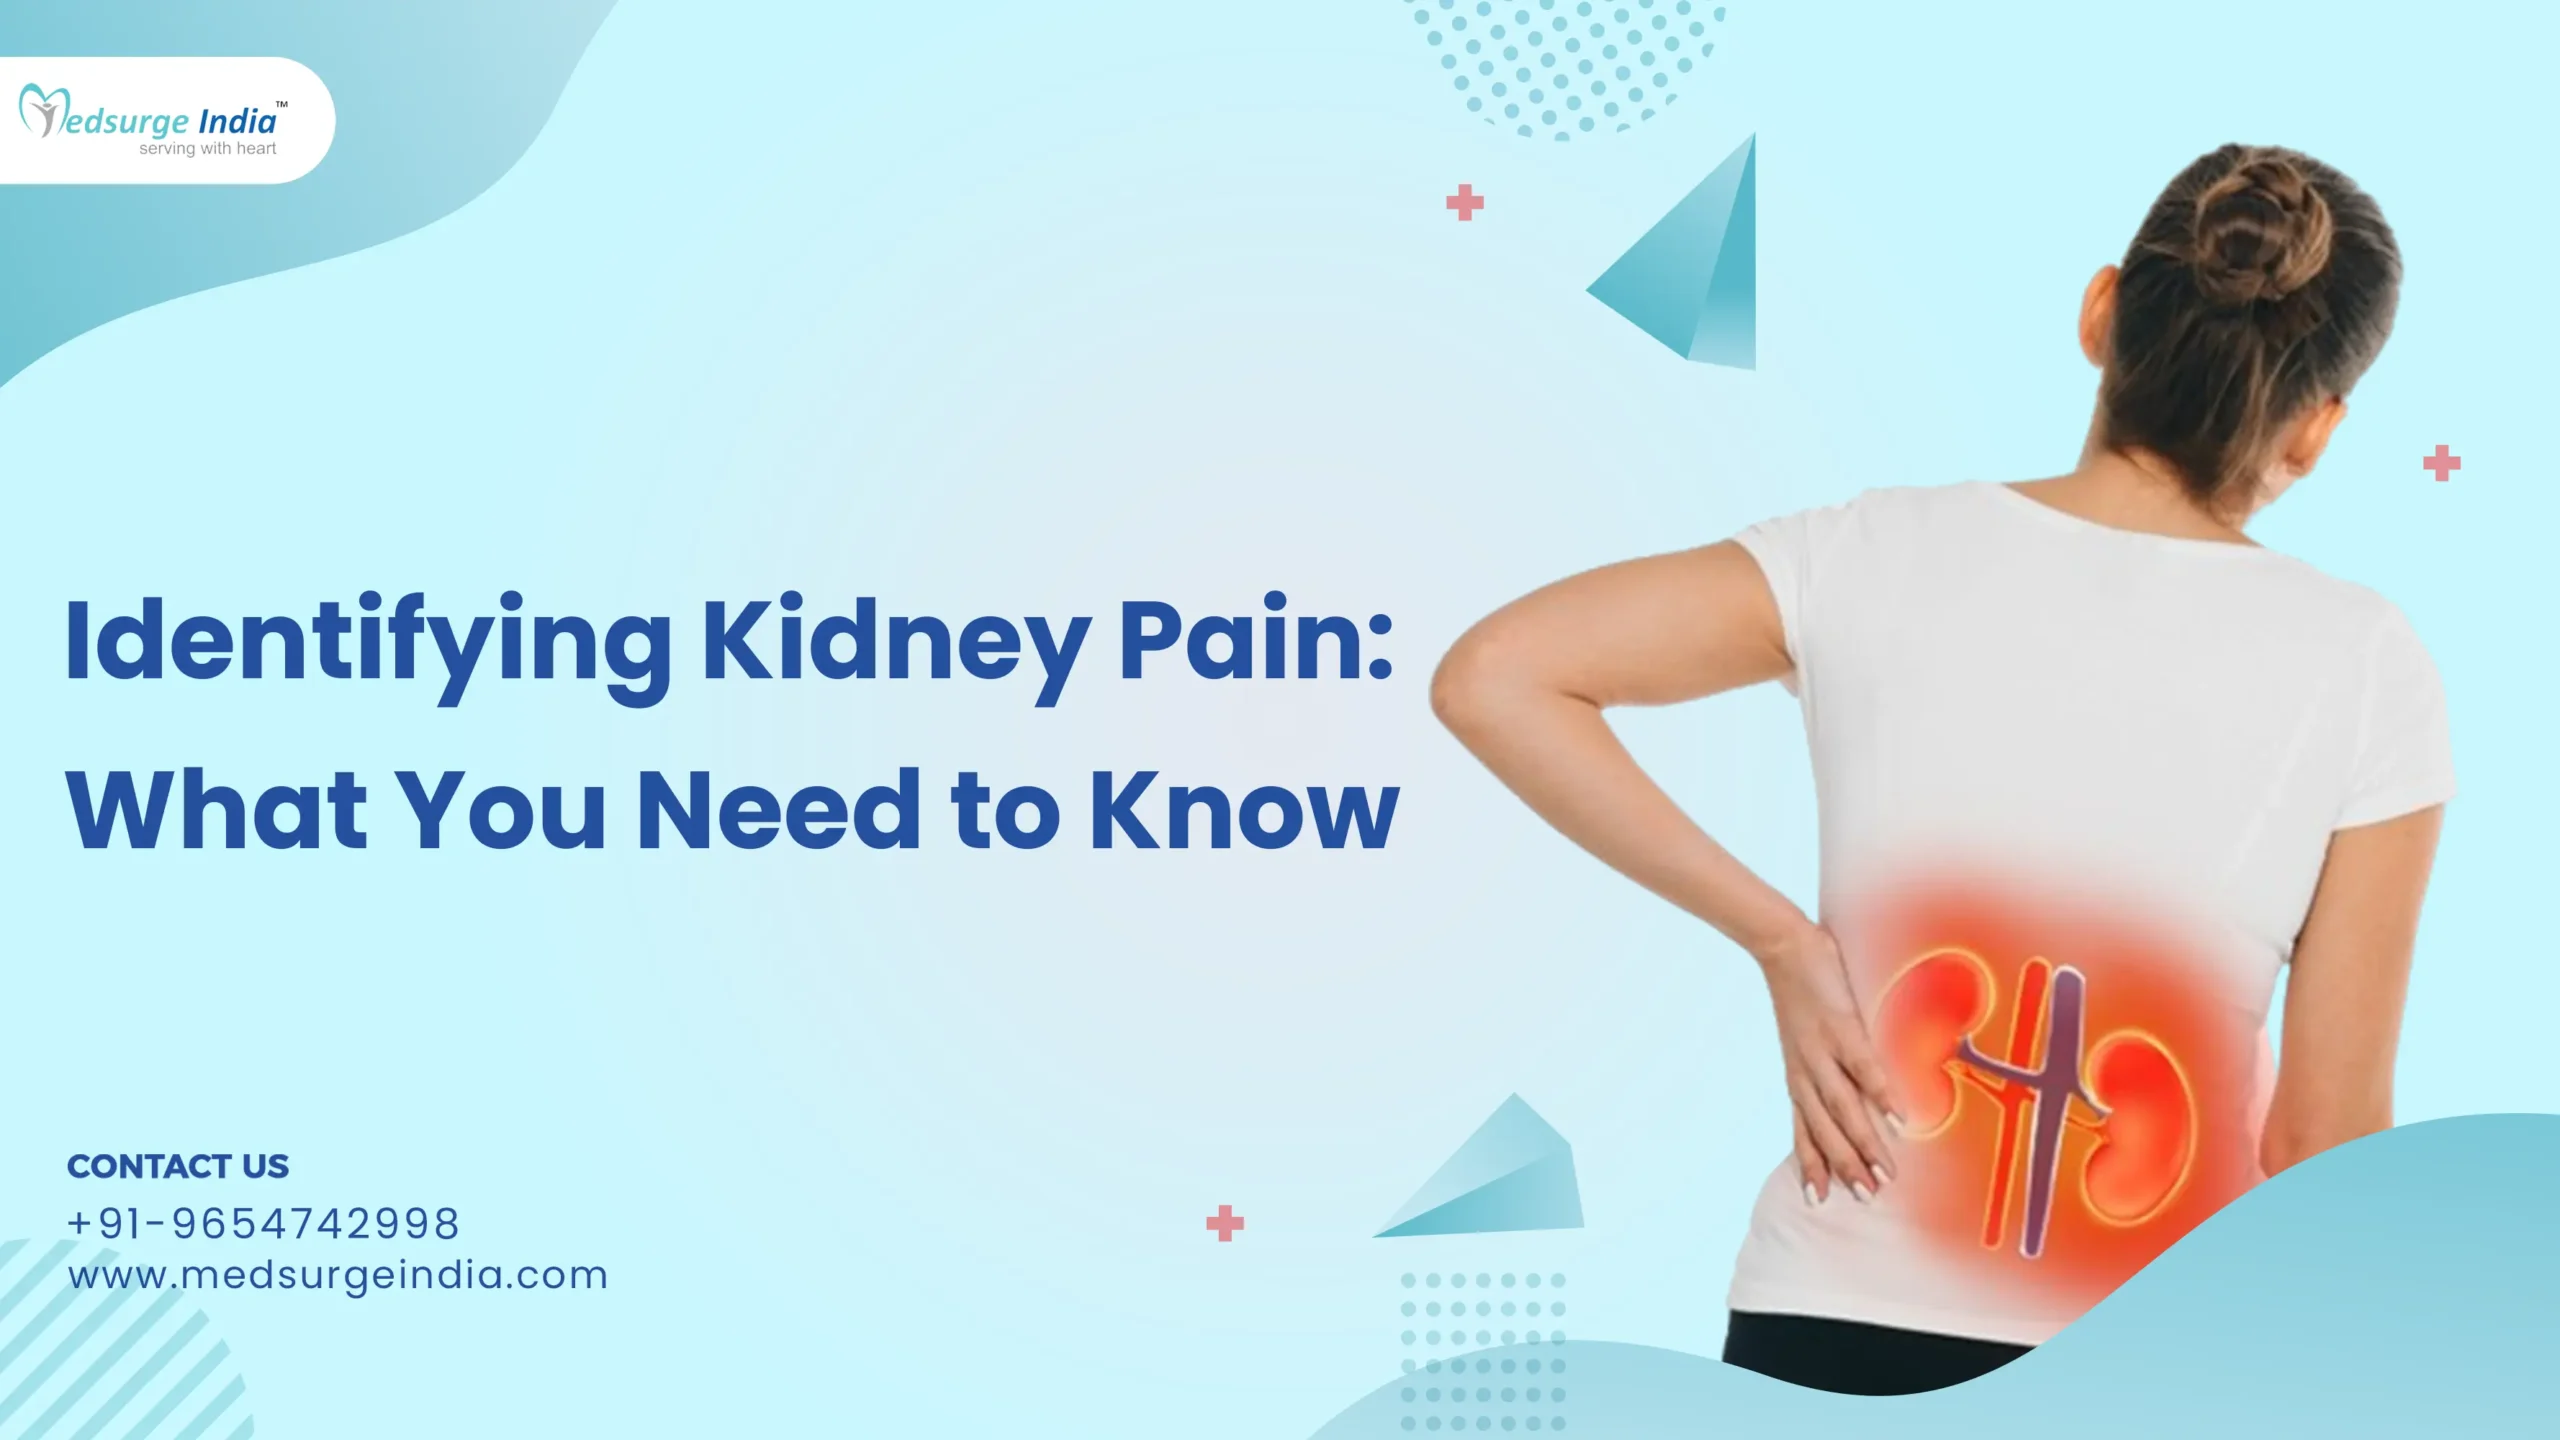 Identifying Kidney Pain: What You Need to Know